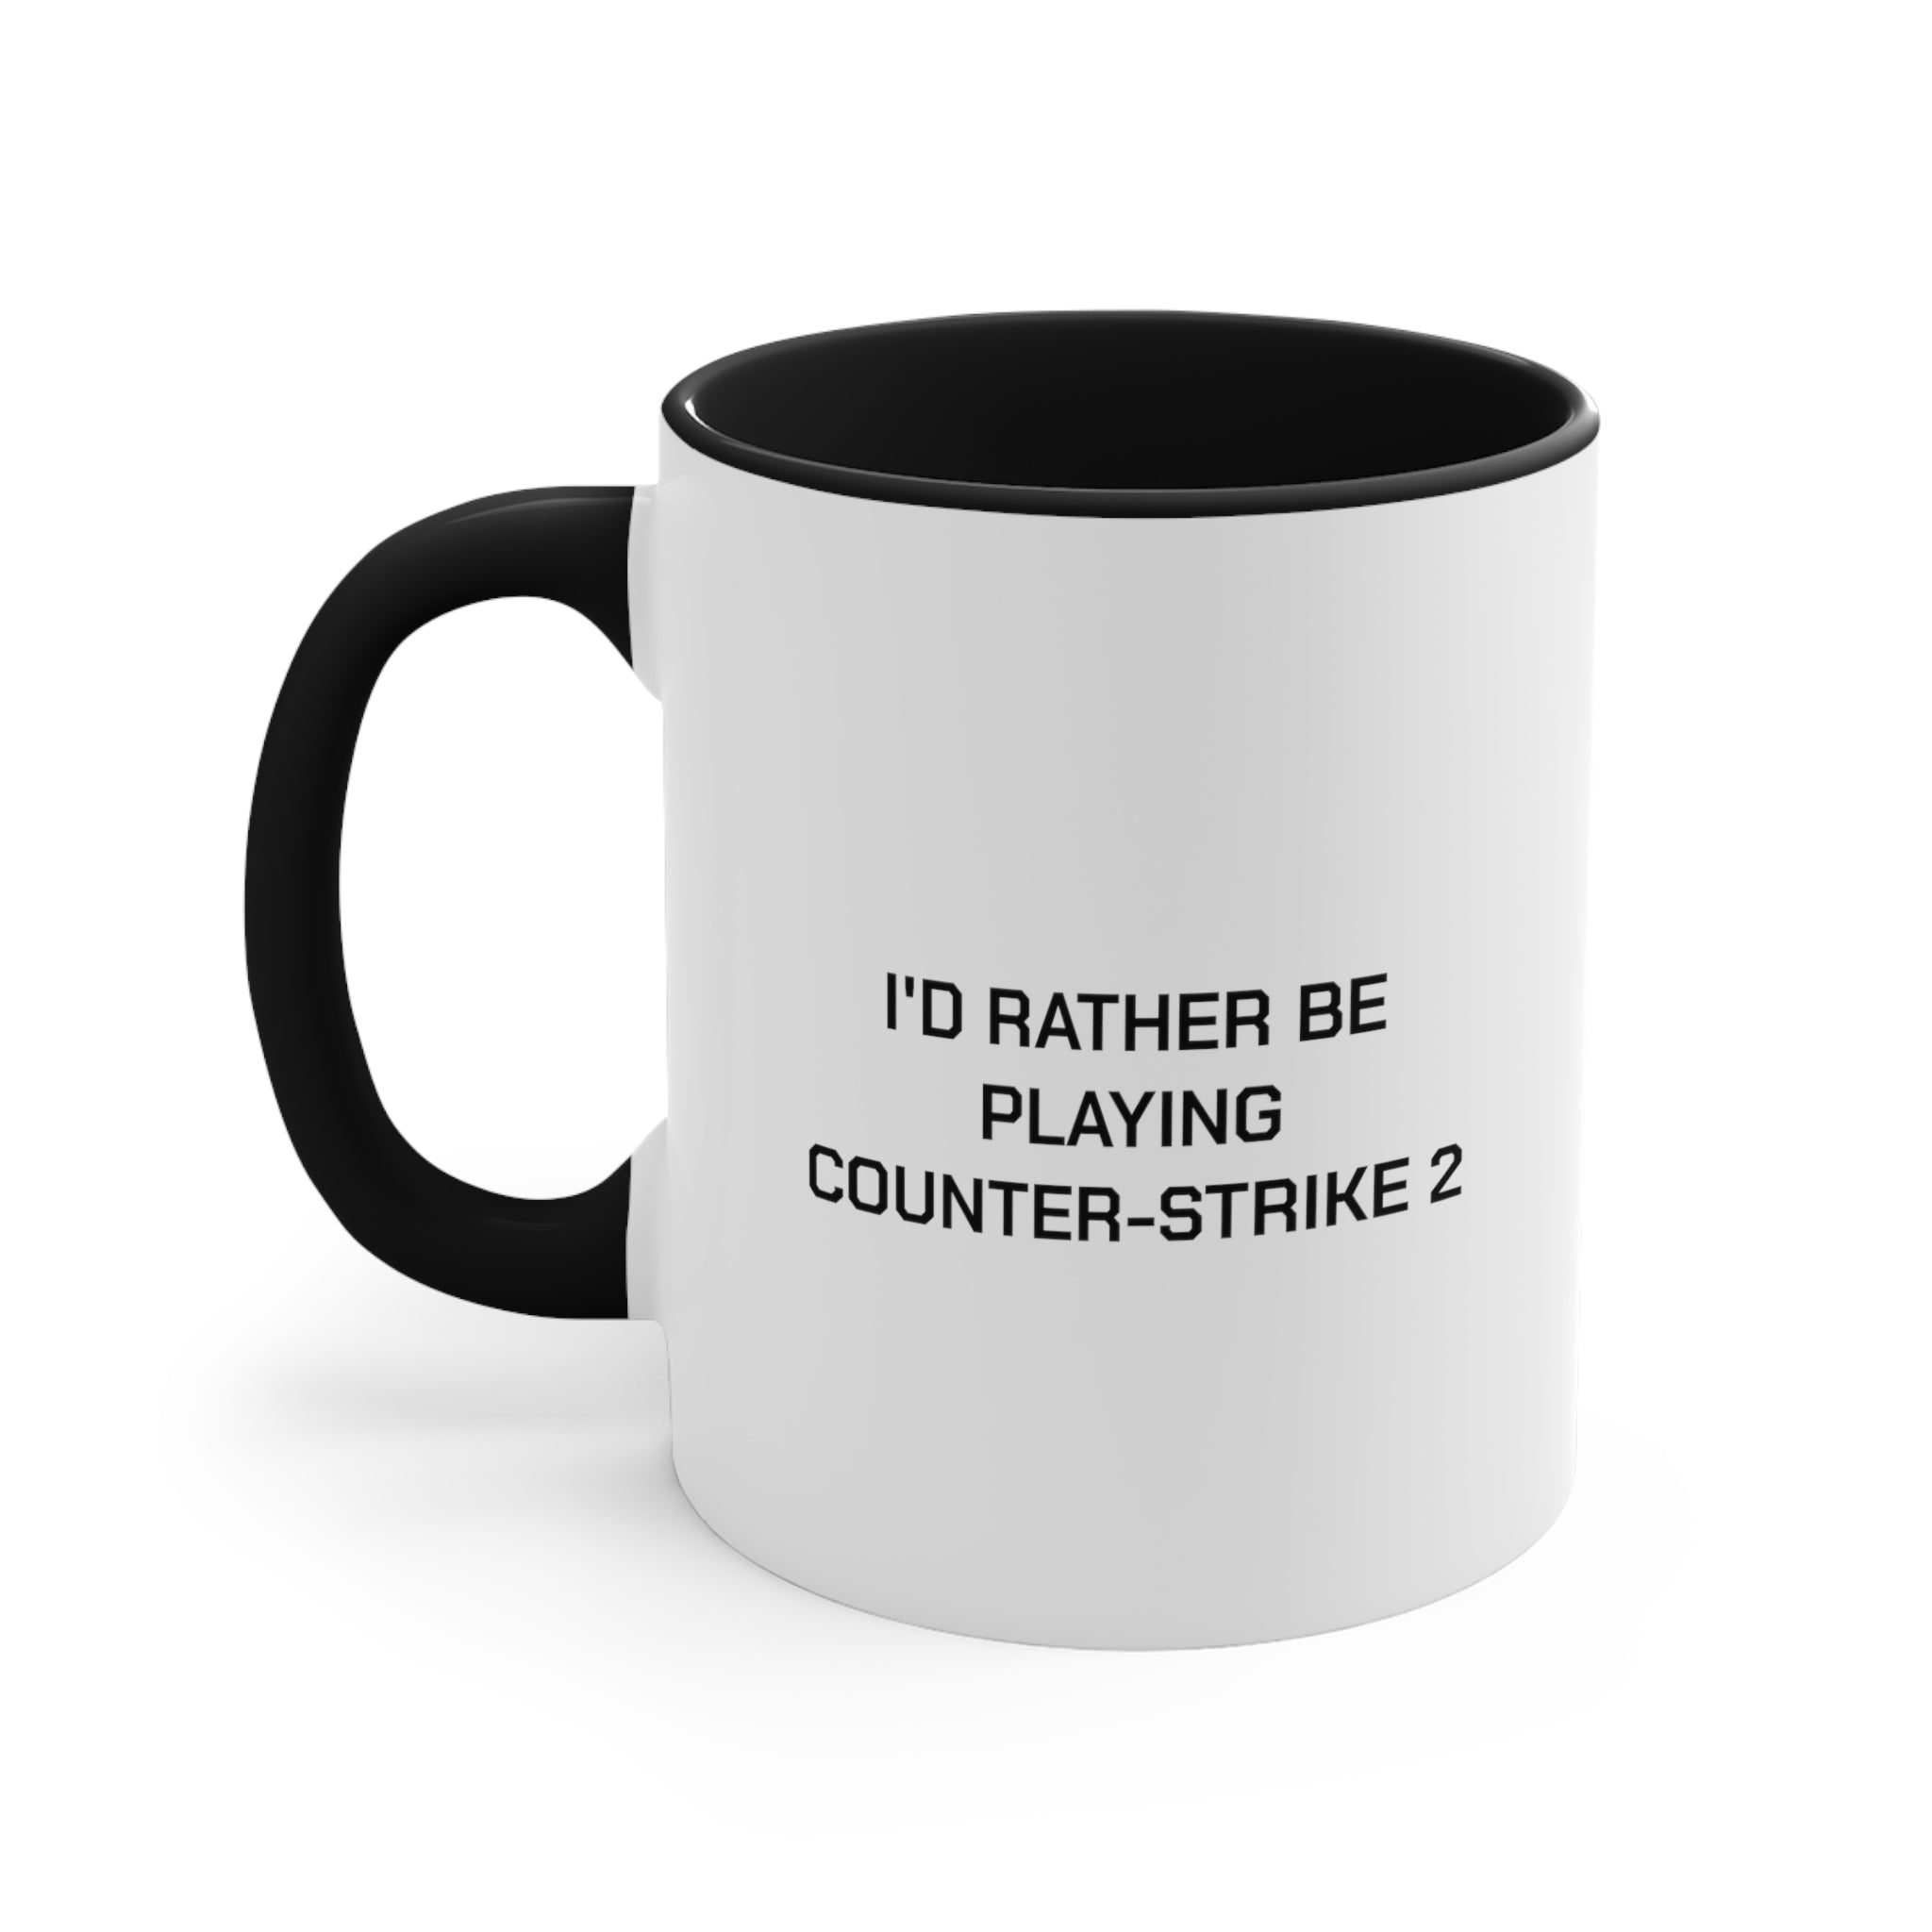 Counter-Strike 2 I'd Rather Be Playing Coffee Mug, 11oz CS GO Counterstrike Cups Mugs Cup Gamer Gift For Him Her Game Cup Cups Mugs Birthday Christmas Valentine's Anniversary Gifts